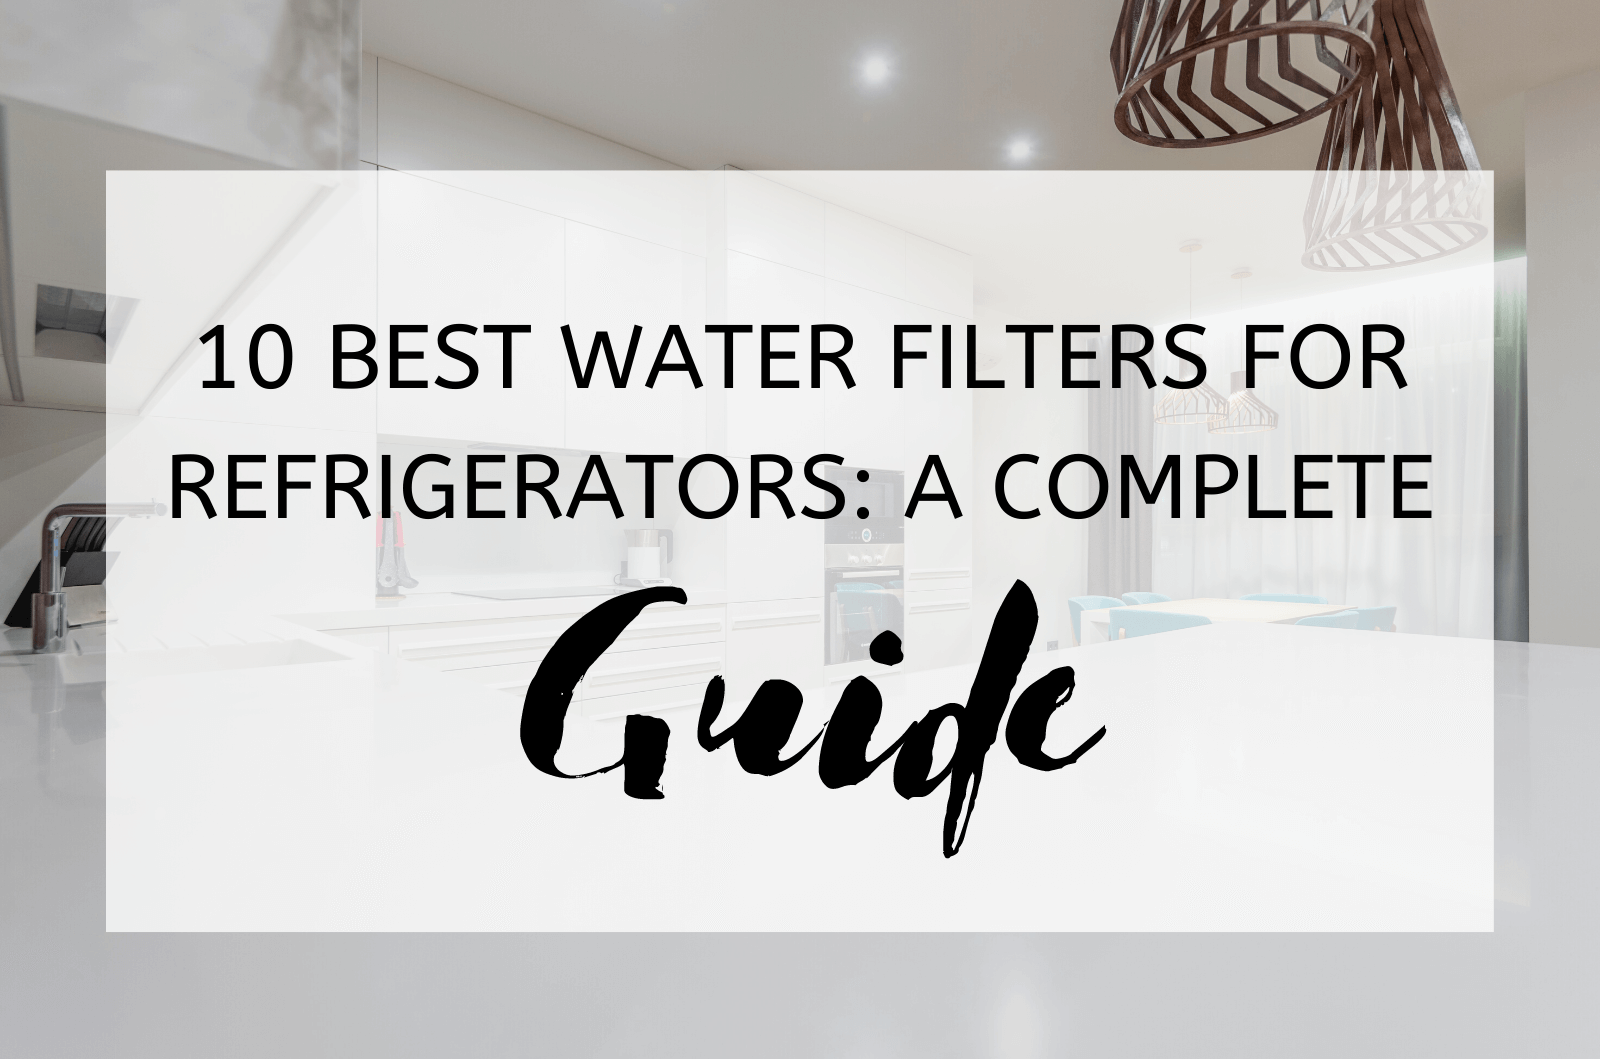 10 Best Water Filters For Refrigerators A Complete Guide (1)